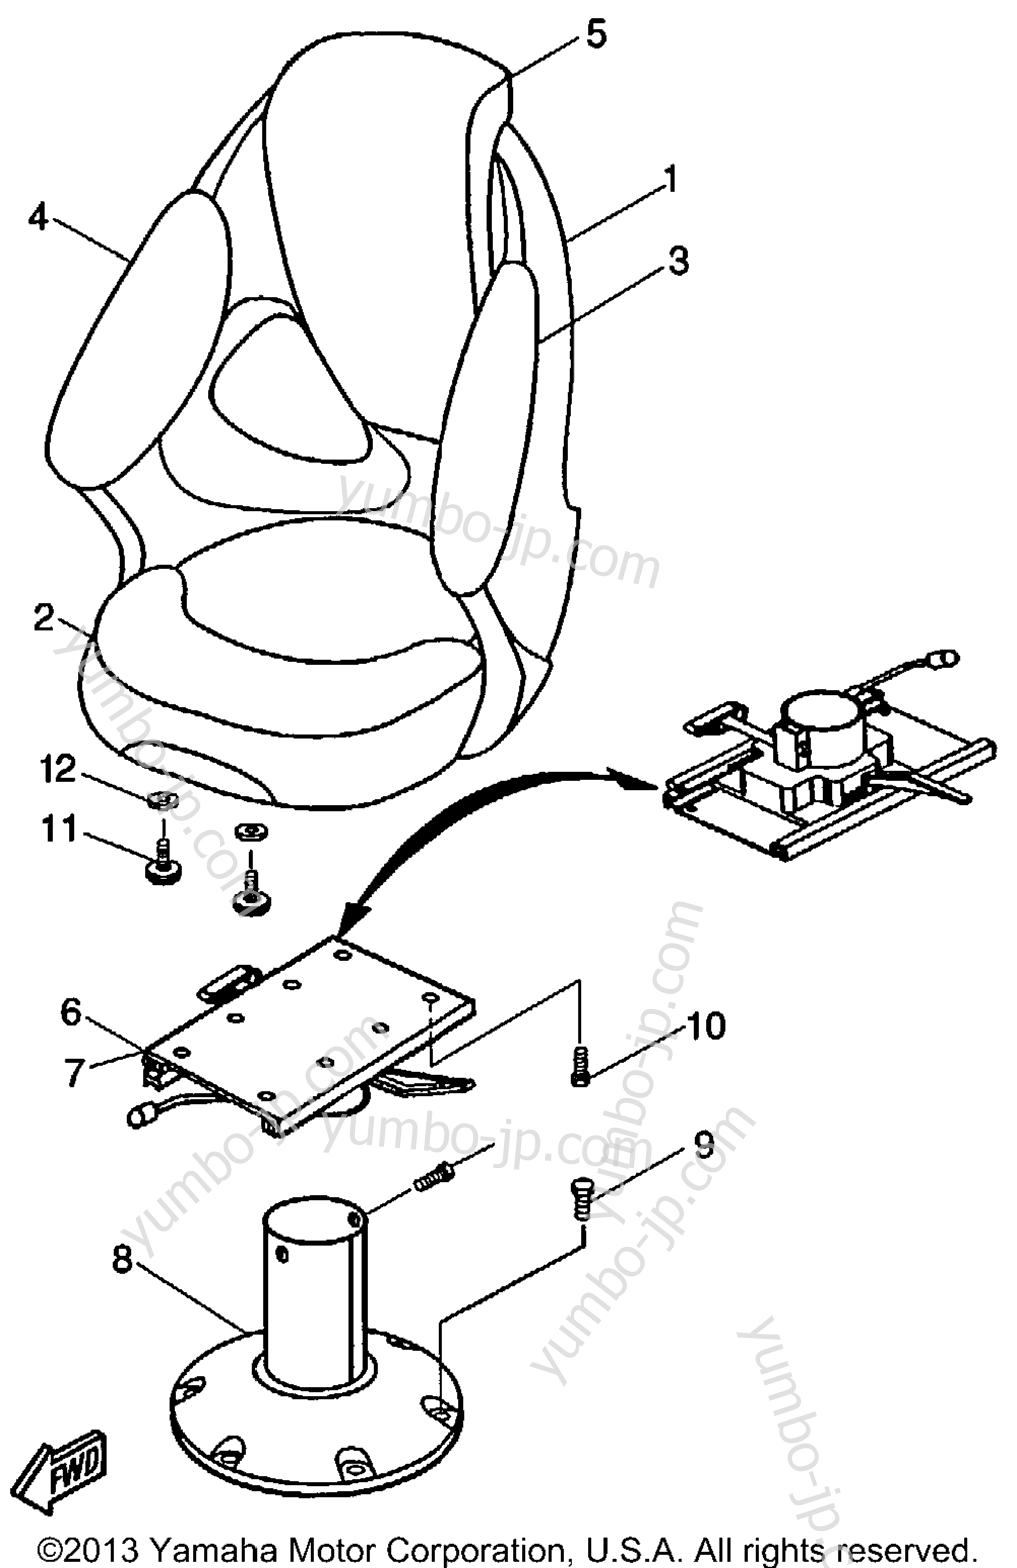 Swivel Seat for boats YAMAHA LS2000 (LST1200Y) 2000 year